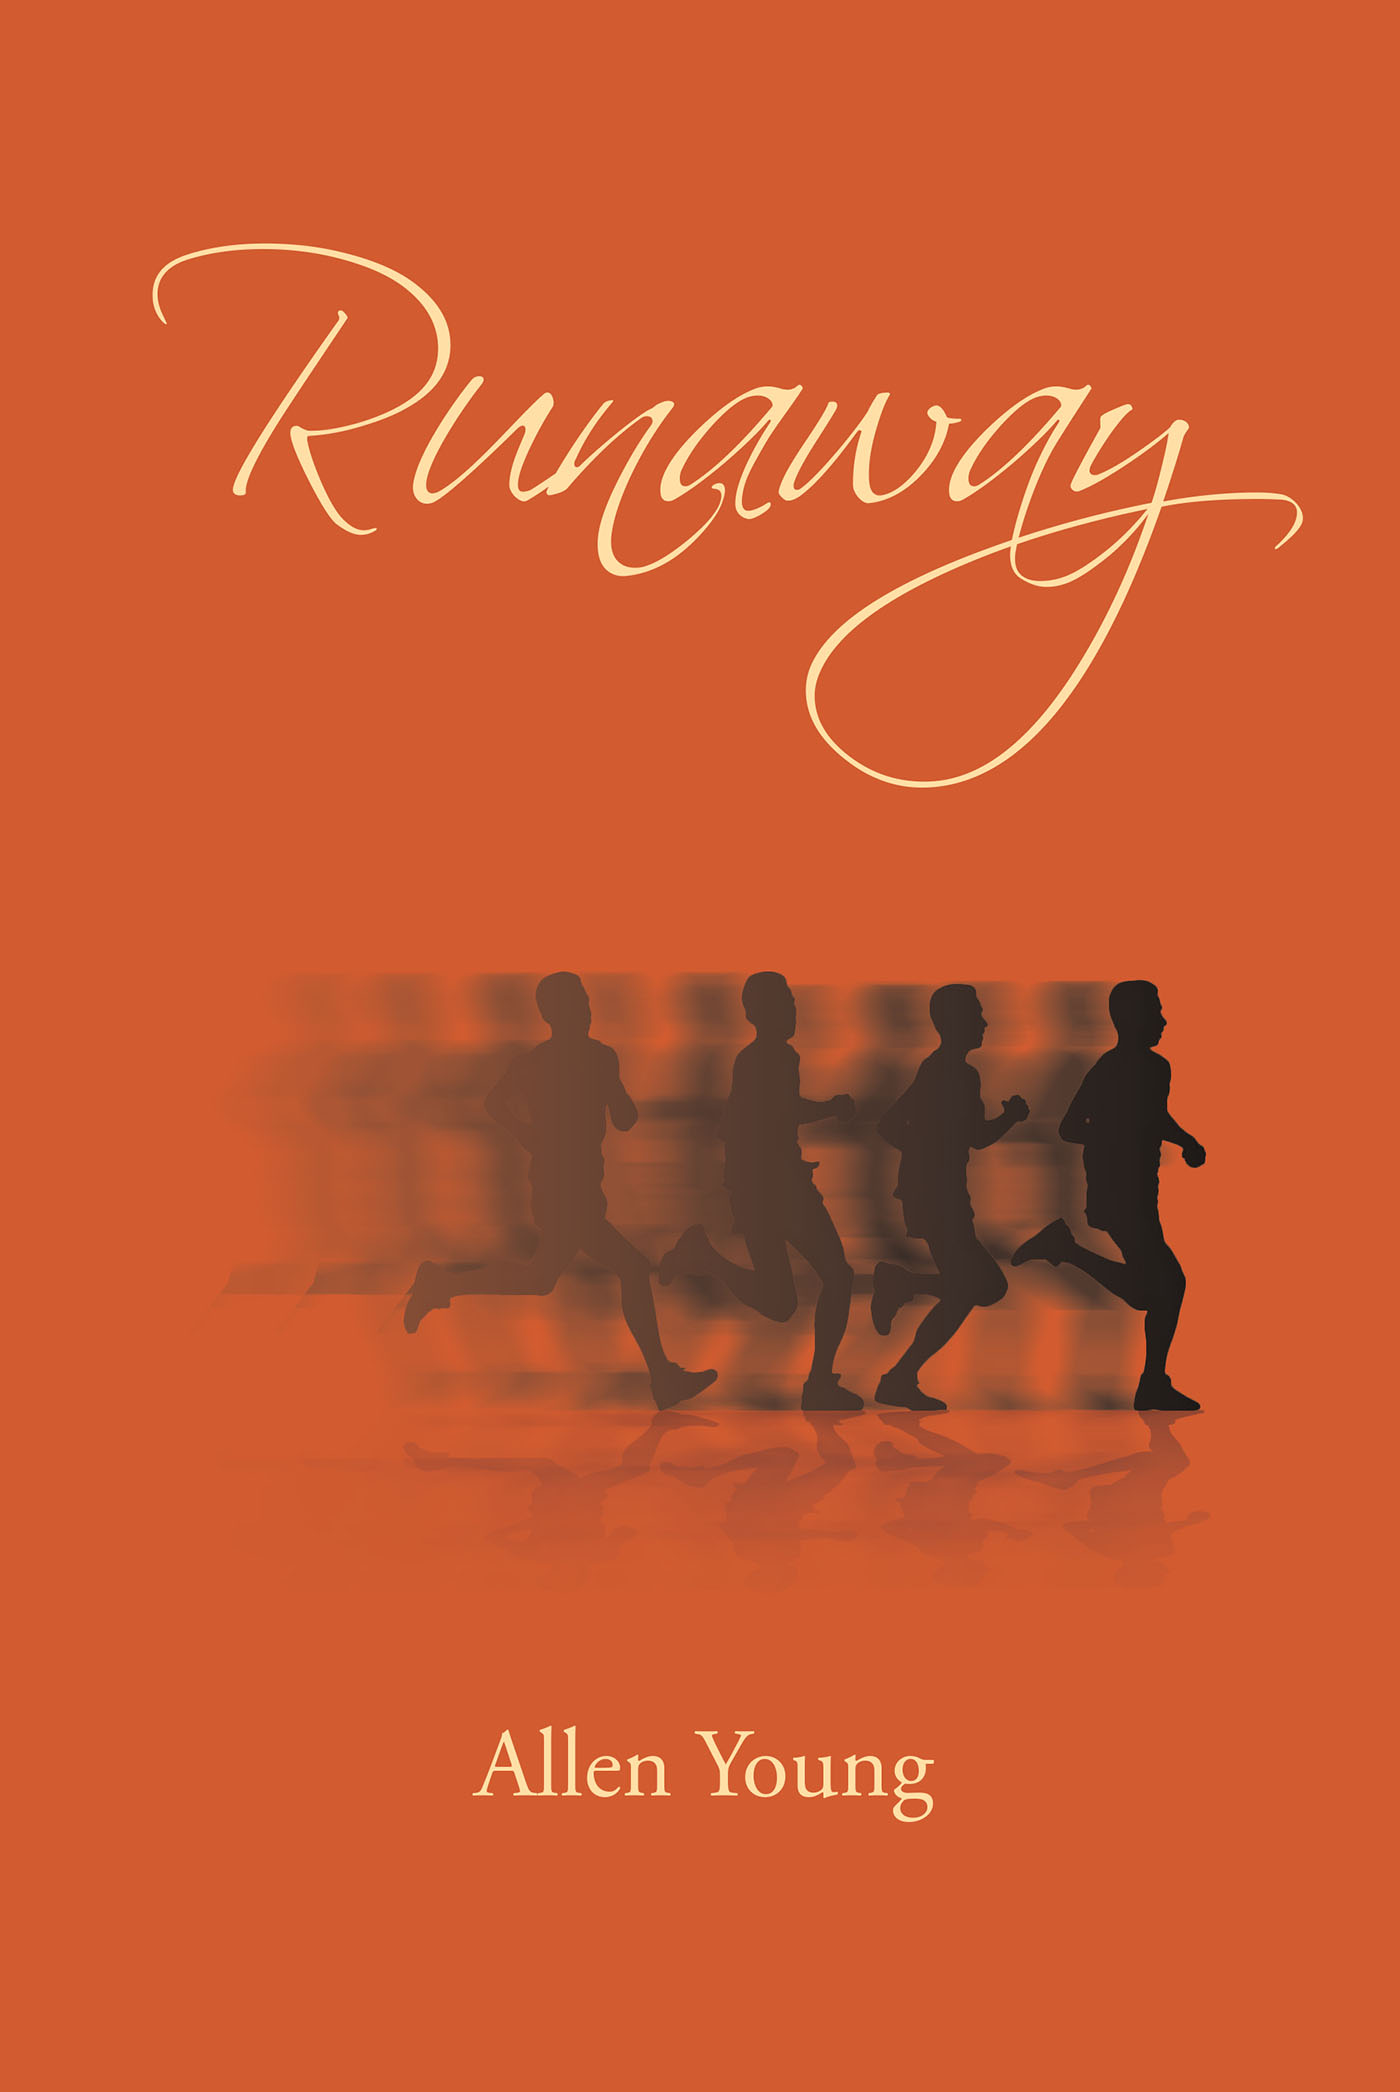 Author Allen Young’s New Book, "Runaway," is a Fast-Paced Novel Following a Young Man as He Navigates His First Love, the Dangers of Firefighting, and Self-Discovery